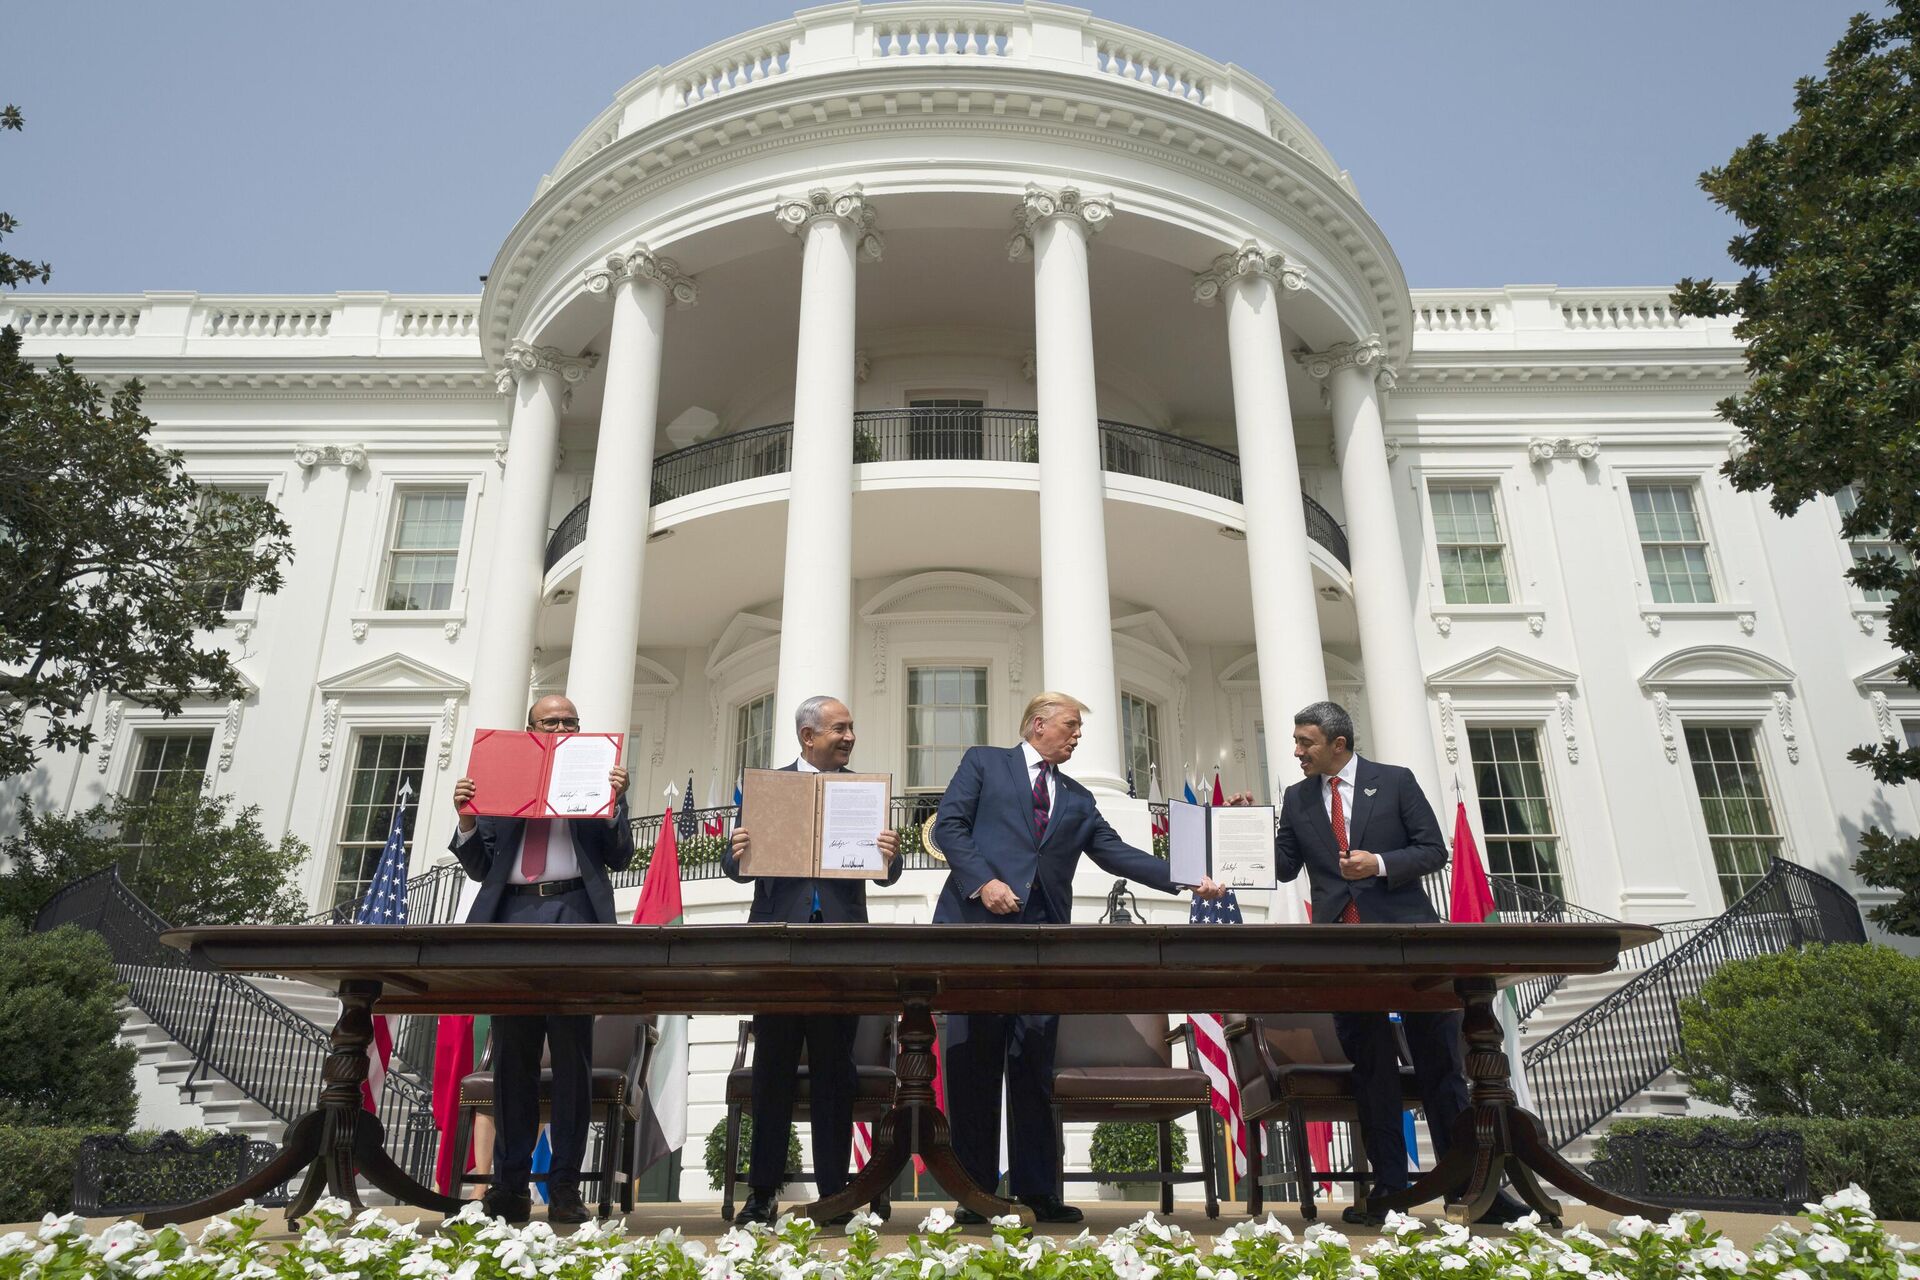 President Donald Trump, center, with, from left, Bahrain Foreign Minister Khalid bin Ahmed Al Khalifa, Israeli Prime Minister Benjamin Netanyahu, and United Arab Emirates Foreign Minister Abdullah bin Zayed al-Nahyan, during the Abraham Accords signing ceremony on the South Lawn of the White House, Tuesday, Sept. 15, 2020, in Washington. - Sputnik India, 1920, 10.11.2023